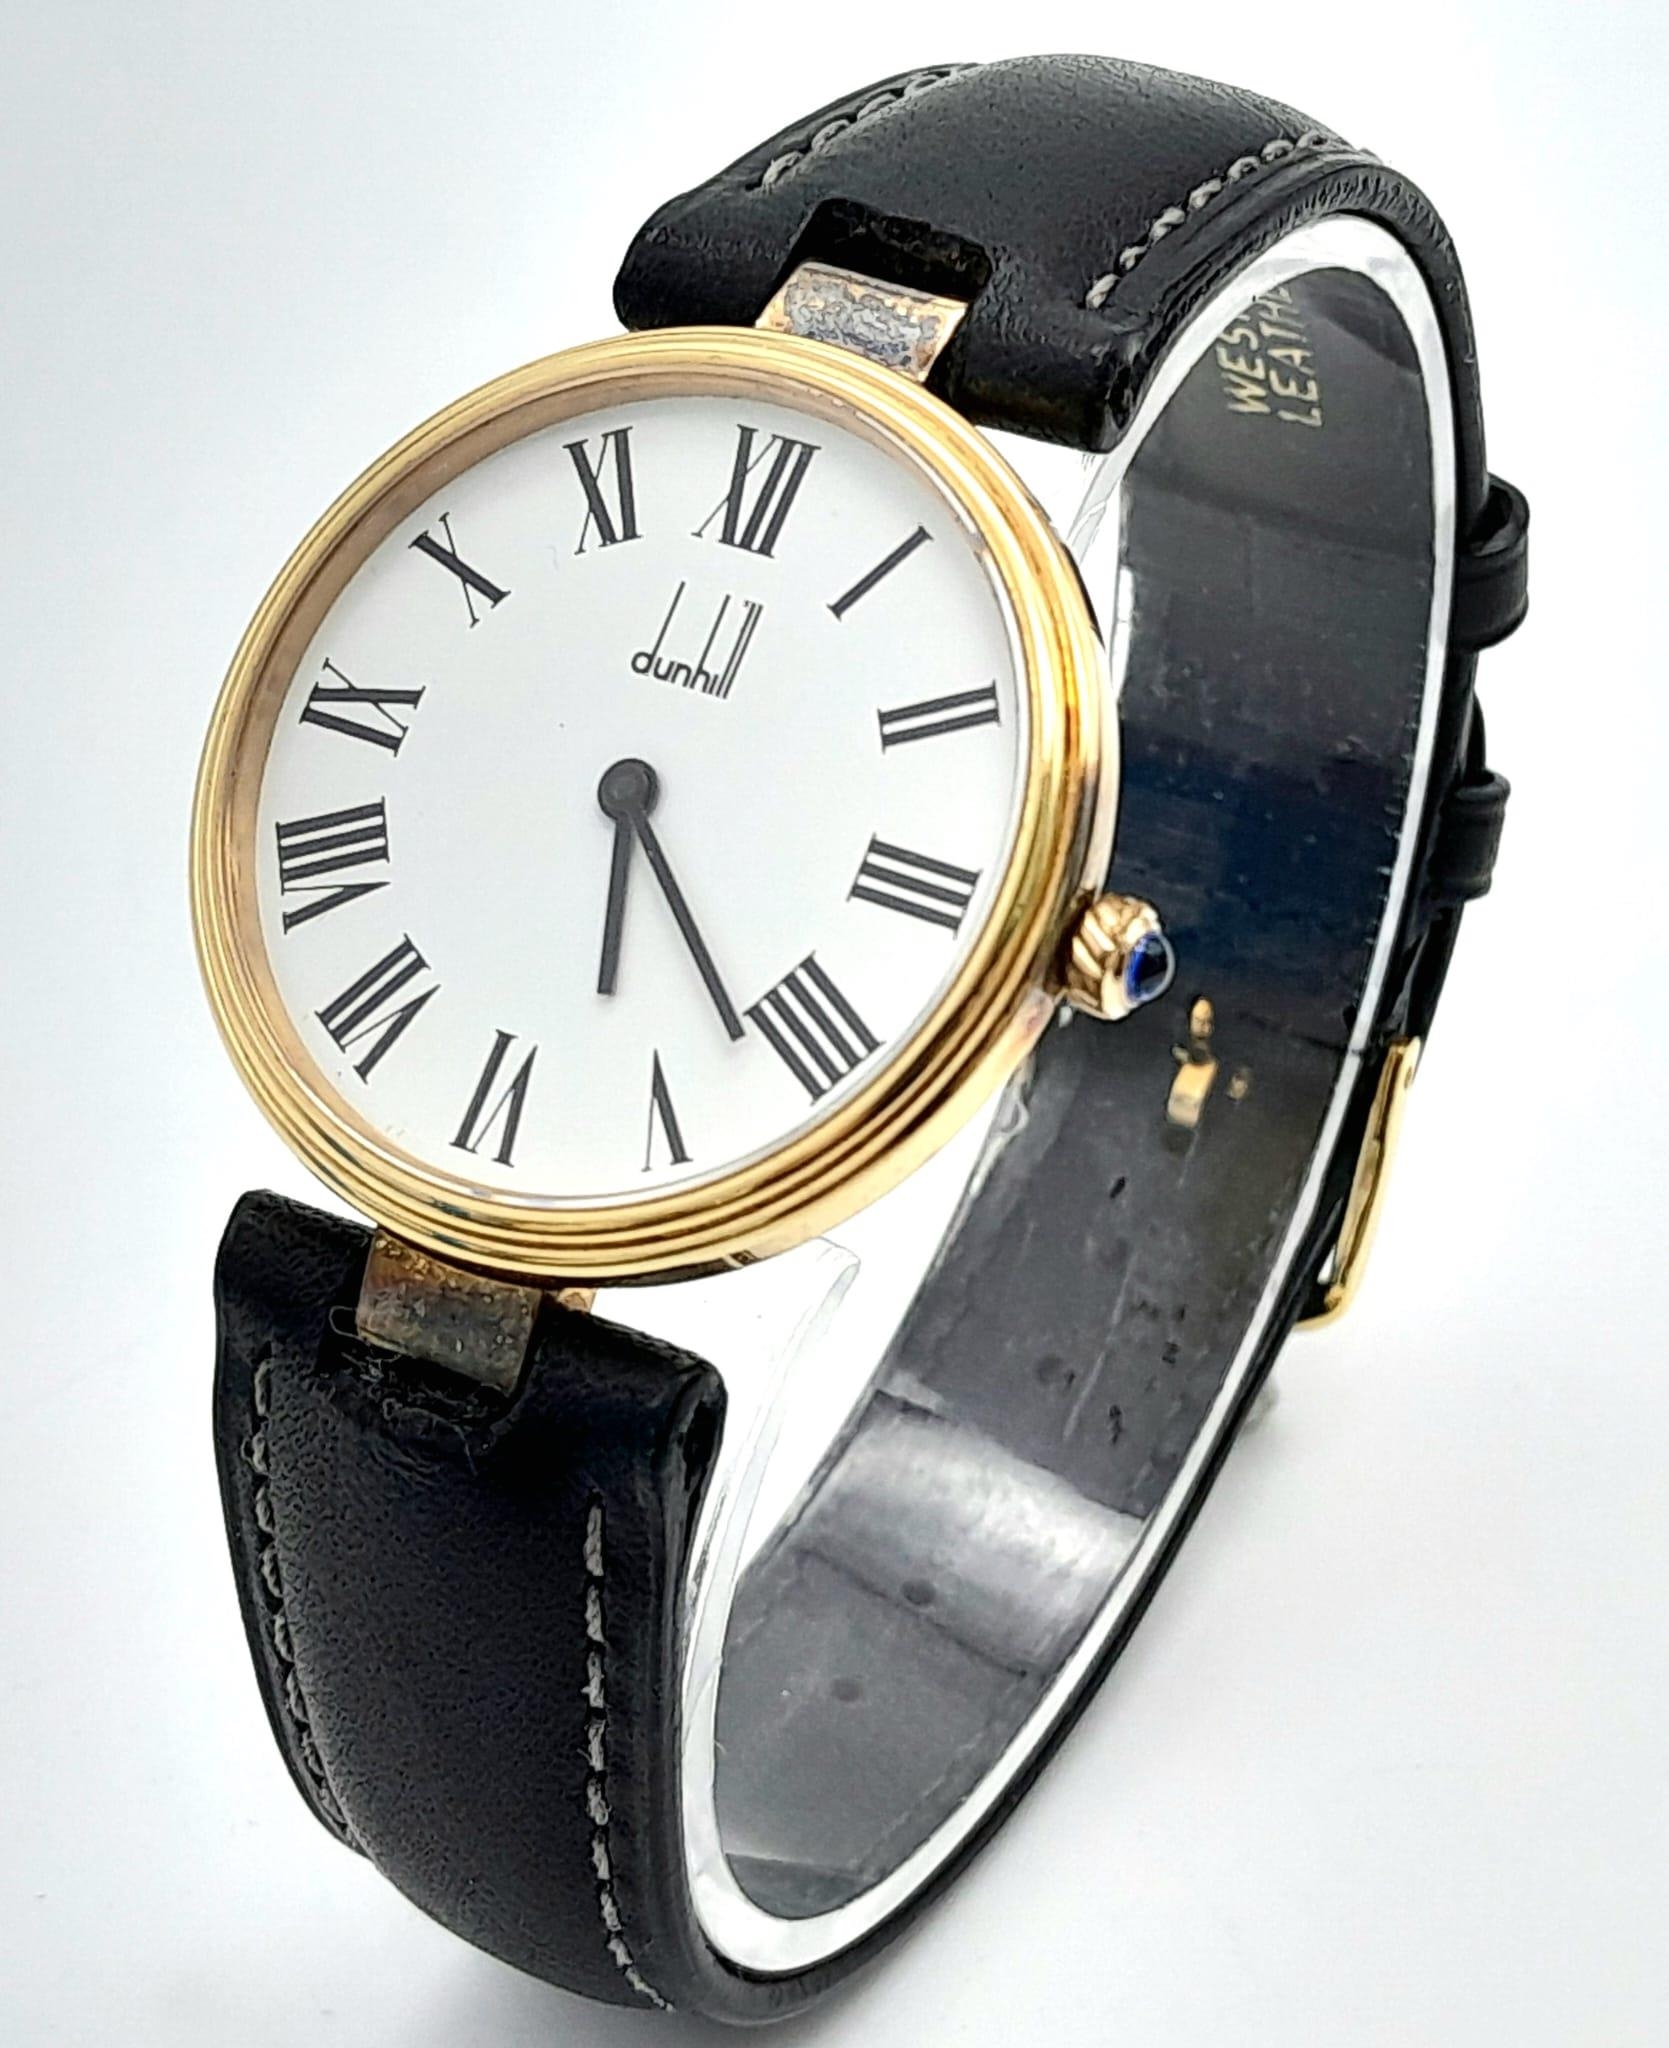 A Dunhill Sterling Silver Gilt Chronometer Watch. 34mm Case, Black Leather Strap. Full Working - Image 2 of 8